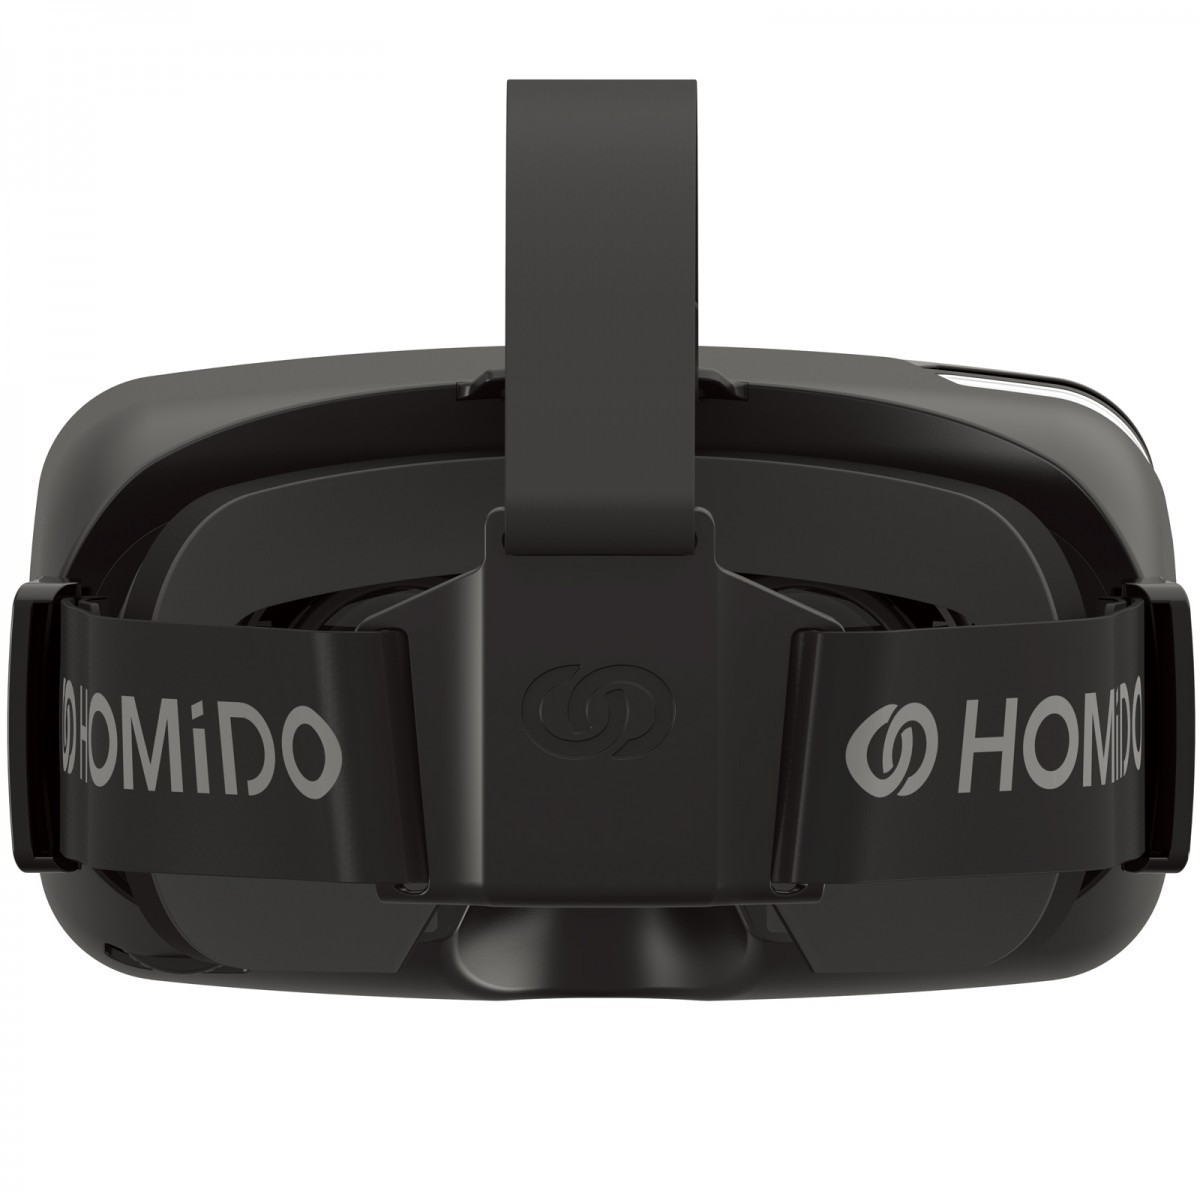 [VR goggle ]HOMIDO V2 DMM FANZA VR Android / iPhone 15 Plus correspondence smartphone idol game gift hobby -stroke less cancellation 